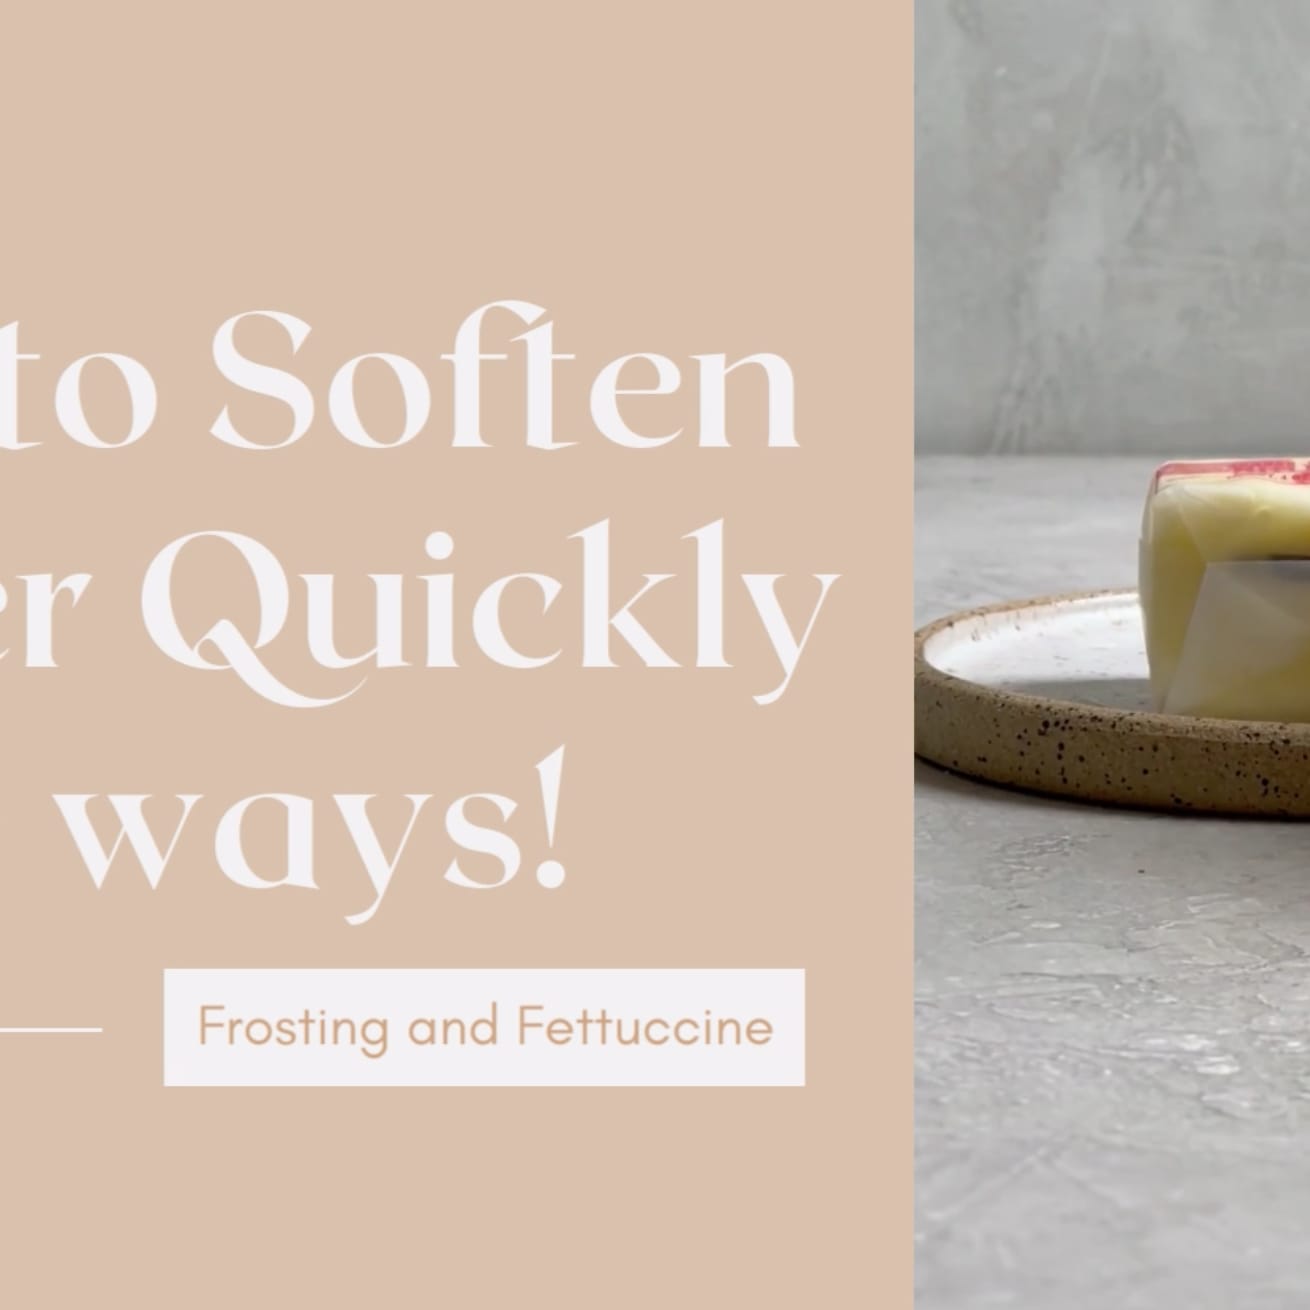 Baking trials: What's the best way to soften butter quickly